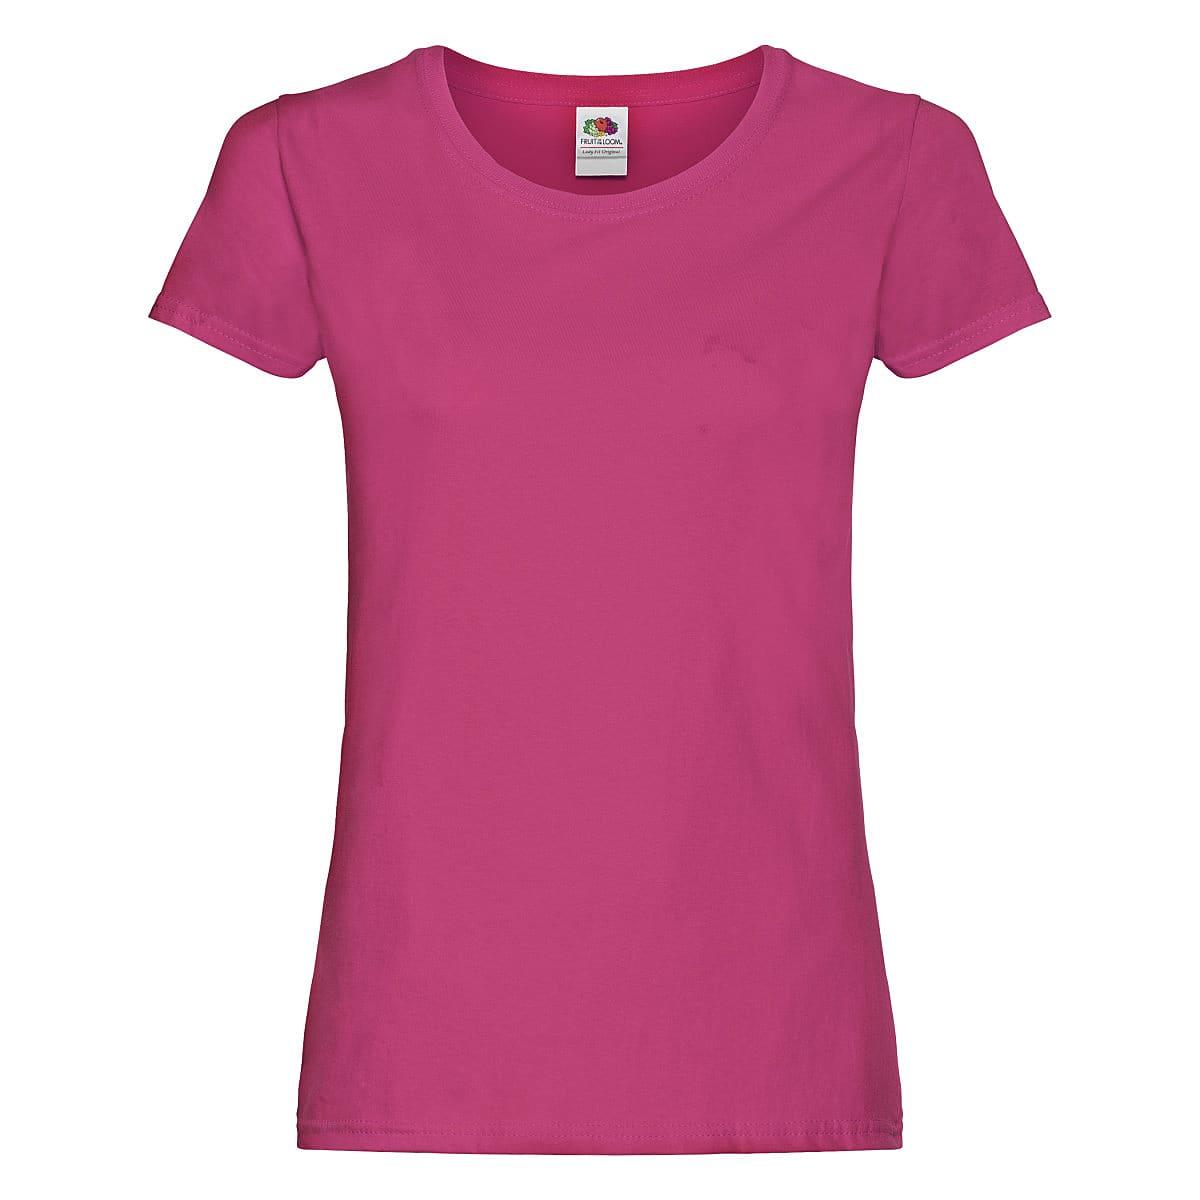 Fruit Of The Loom Lady Fit Original T-Shirt in Fuchsia (Product Code: 61420)